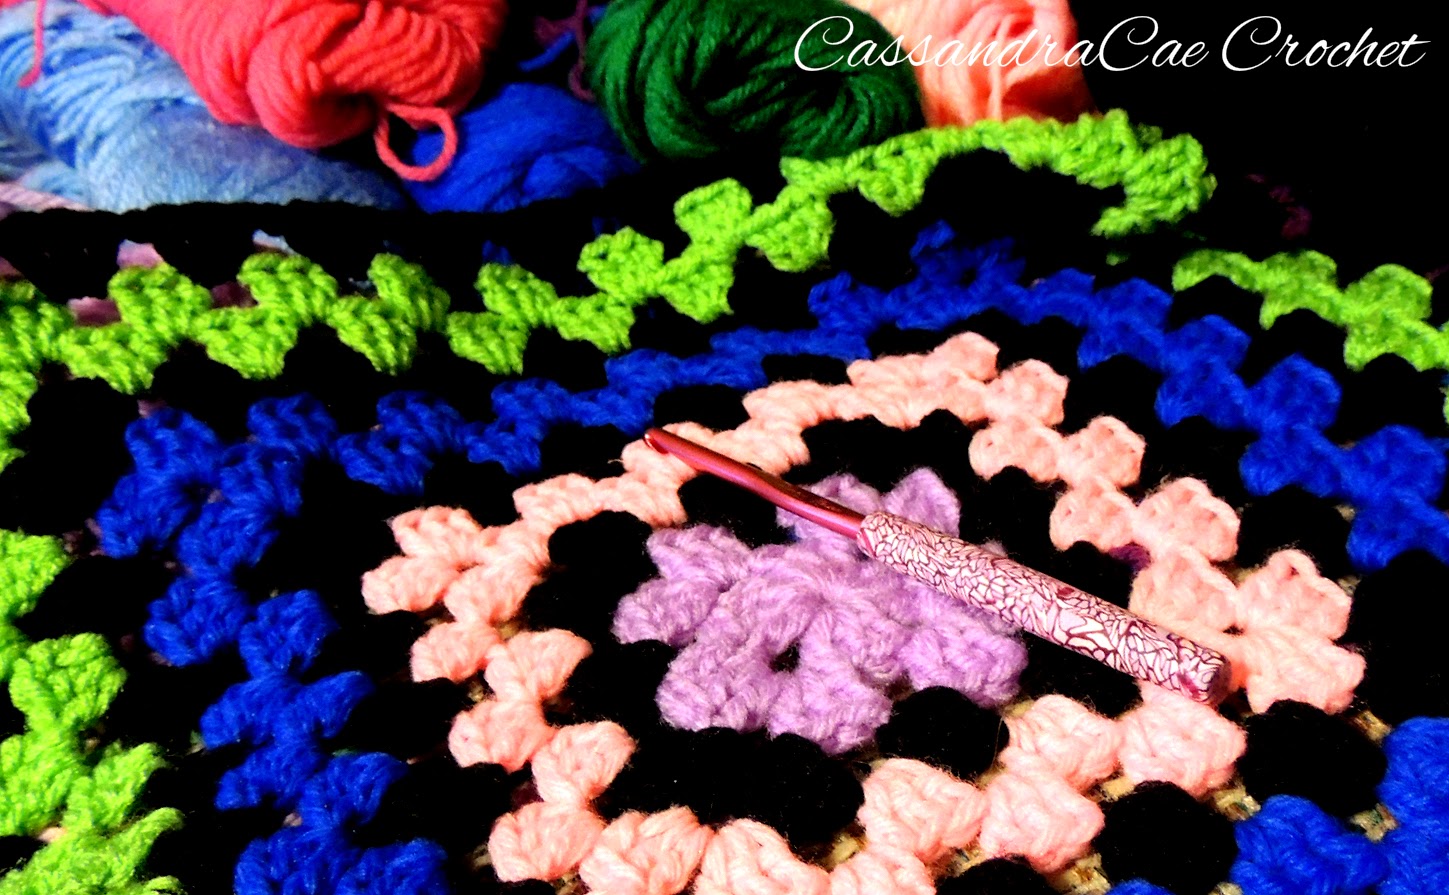 Stained Glass Granny Square Afghan Crochet